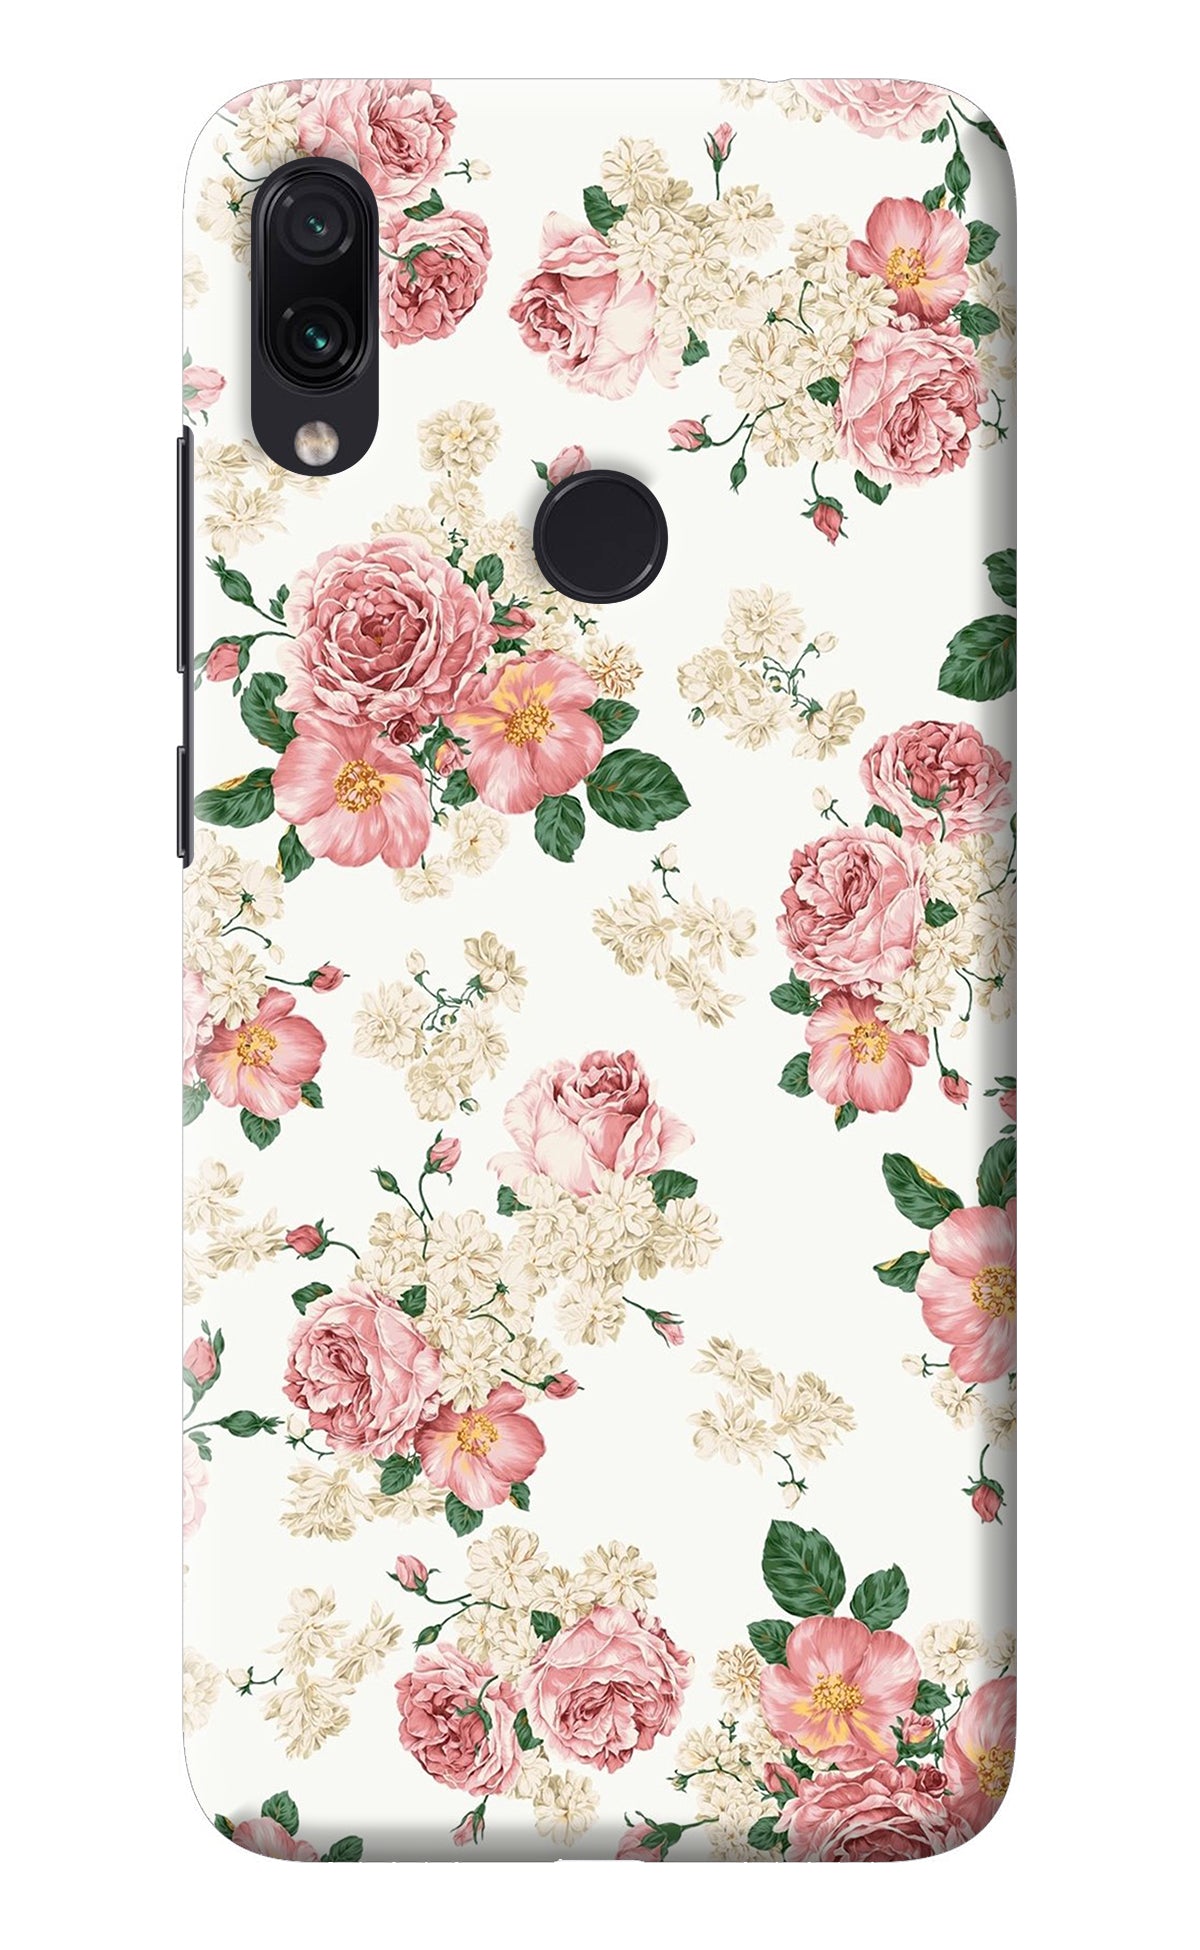 Flowers Redmi Note 7 Pro Back Cover